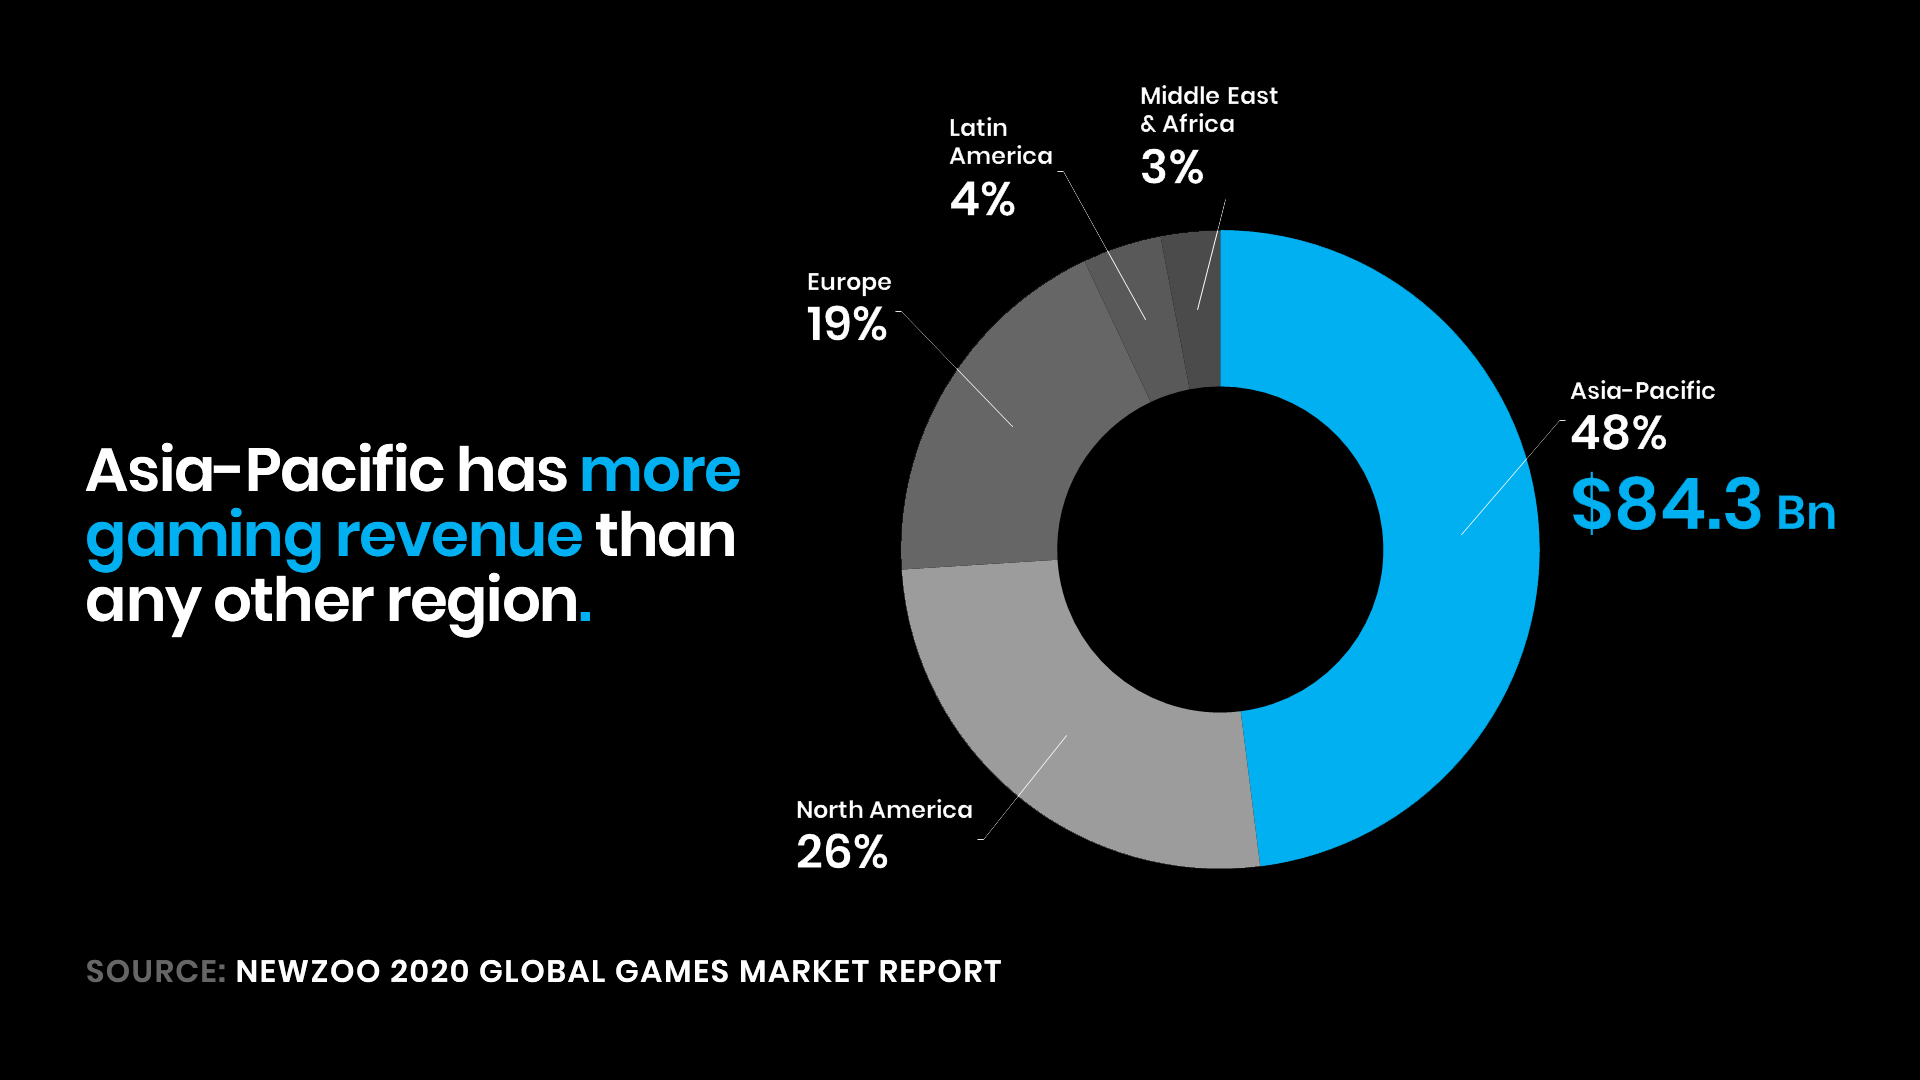 A pie chart showing 48% of global gaming revenue originating from Asia-Pacific — at $84.3 billion